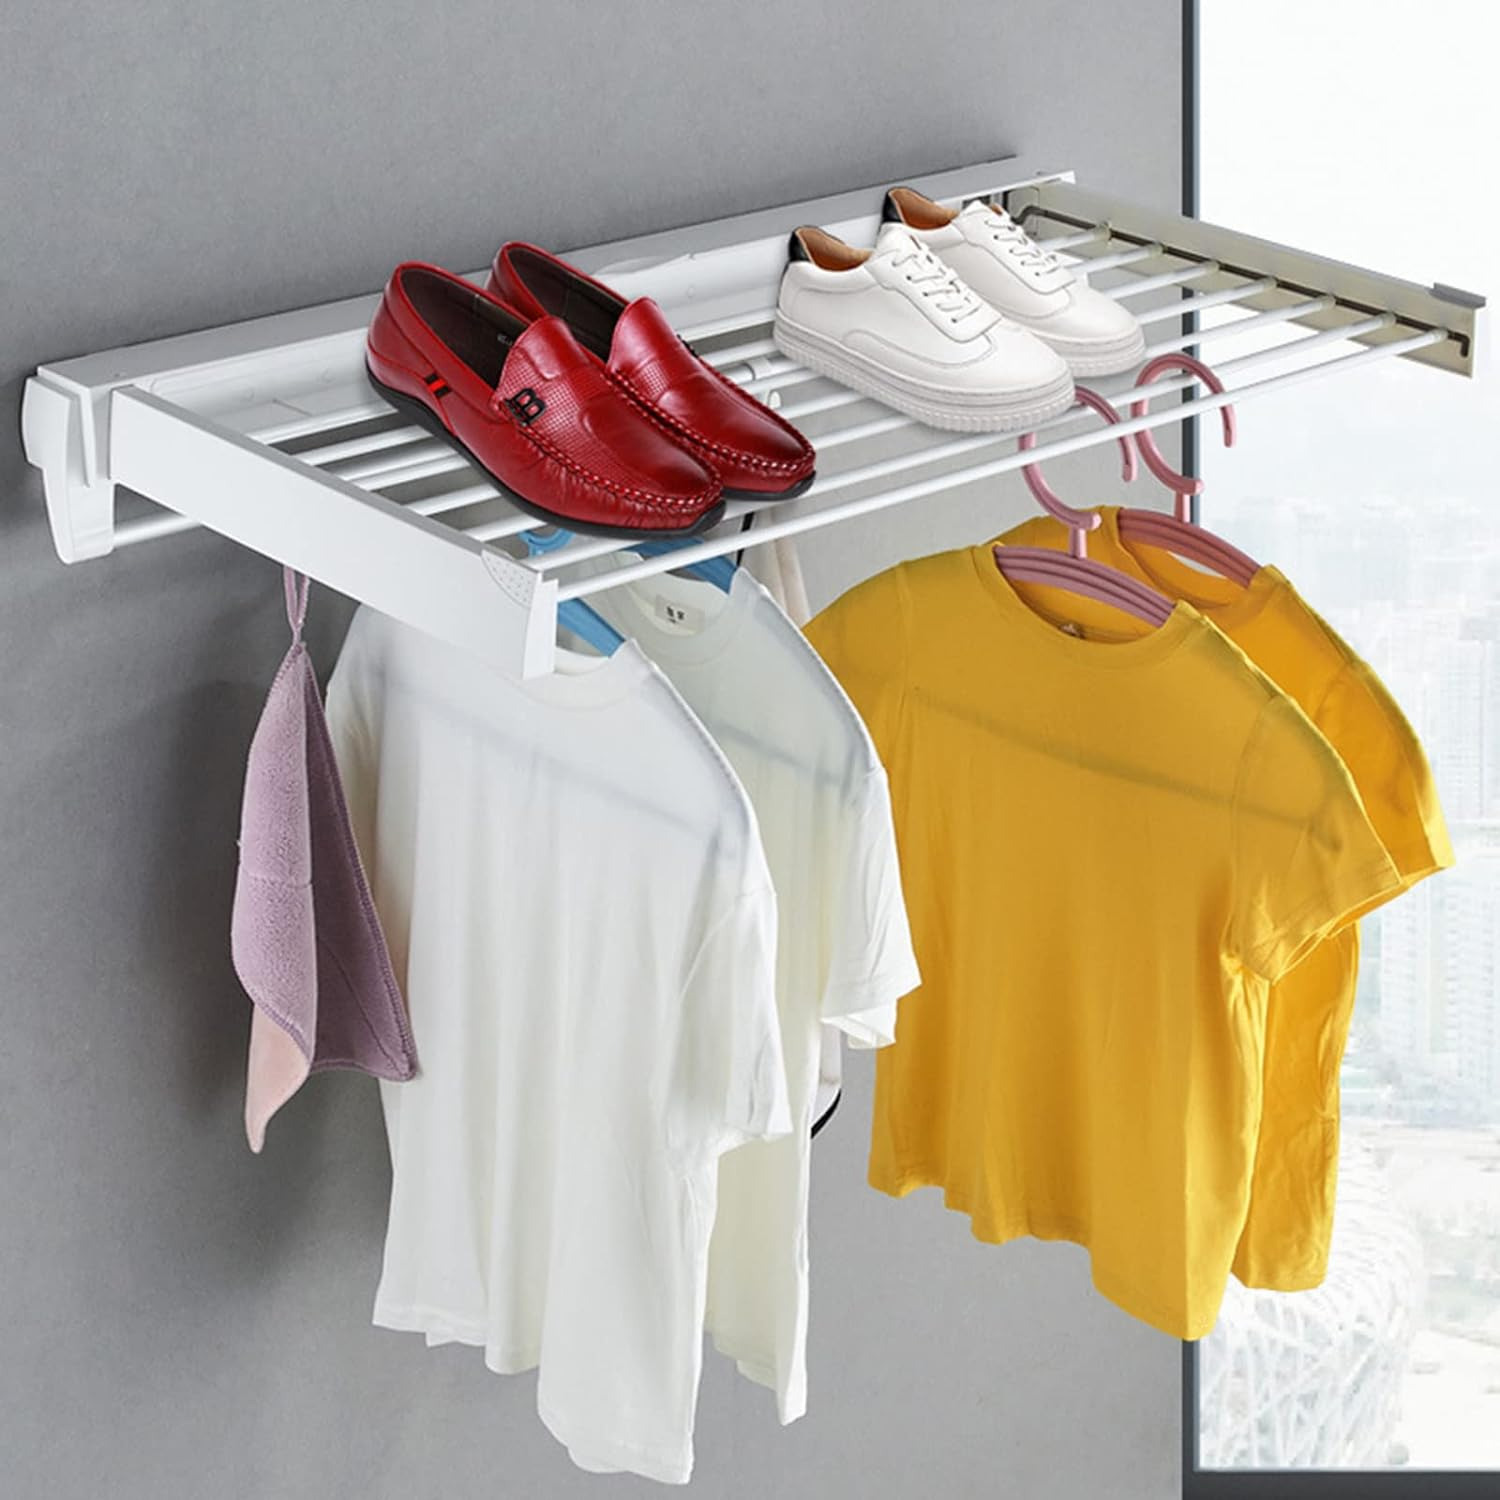 

Clothes Drying Racks, Wall-mounted Retractable Clothes Hanger For Laundry Dryer Room, Rod Laundry Clothes Storage Drying Rack Folding Retractable Dryer Hanger White